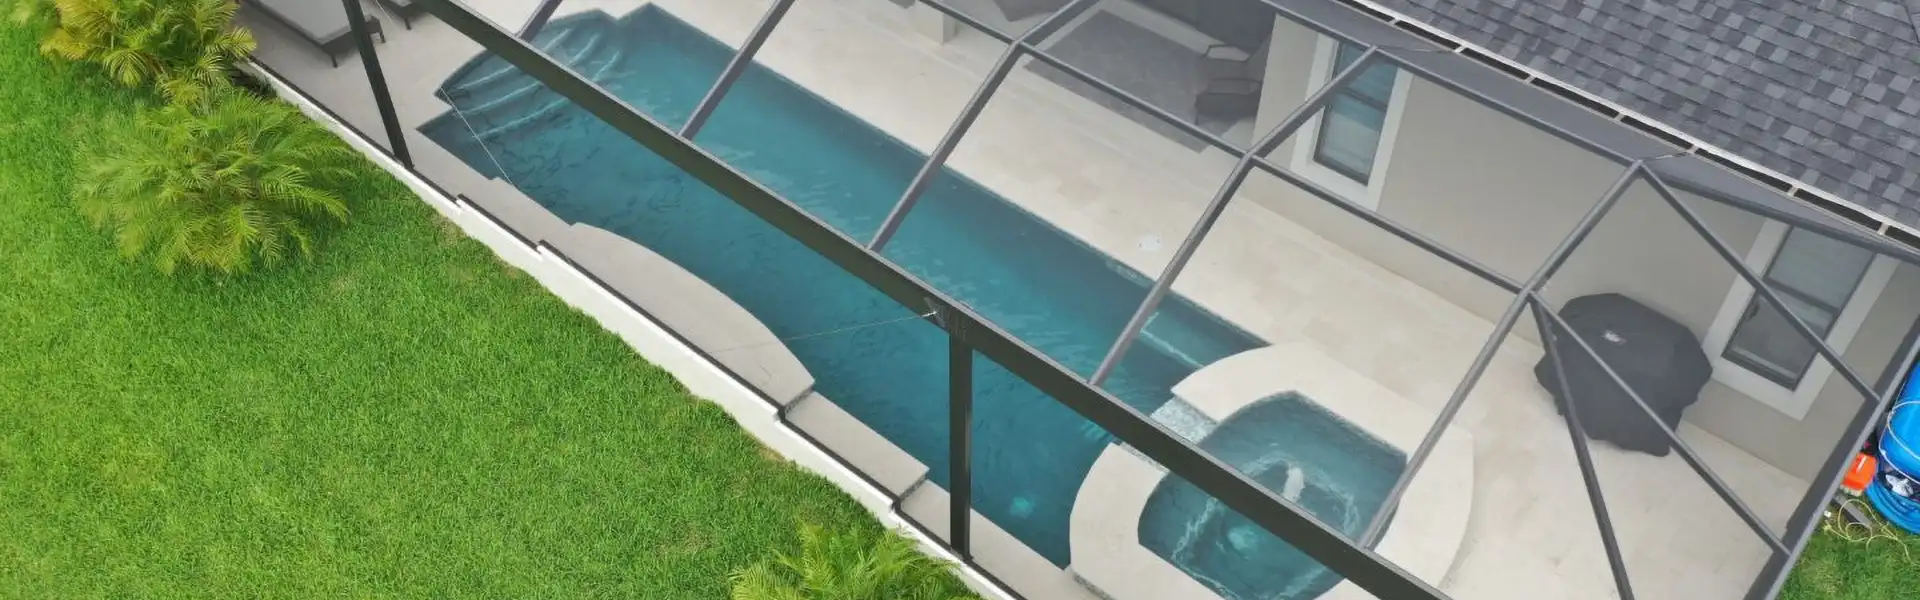 How to Clean Your Pool Screen Enclosure